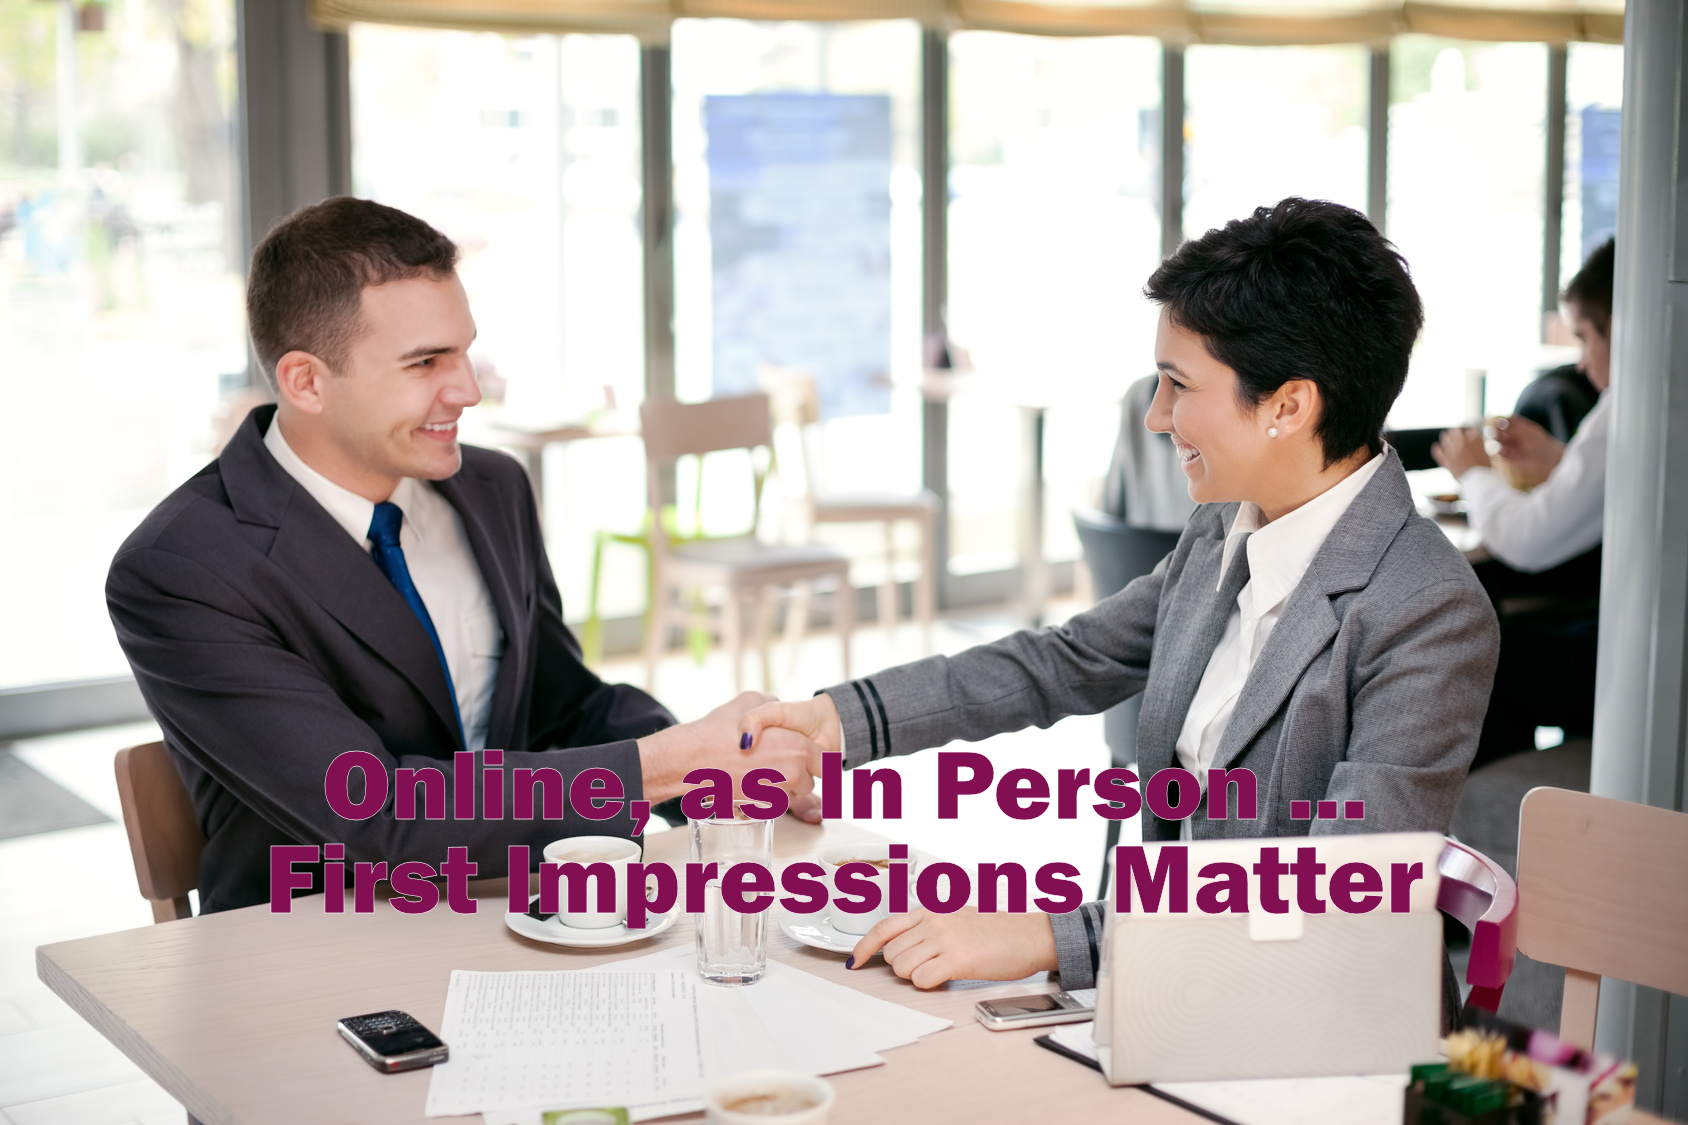 How to Make a Good First Impression Online